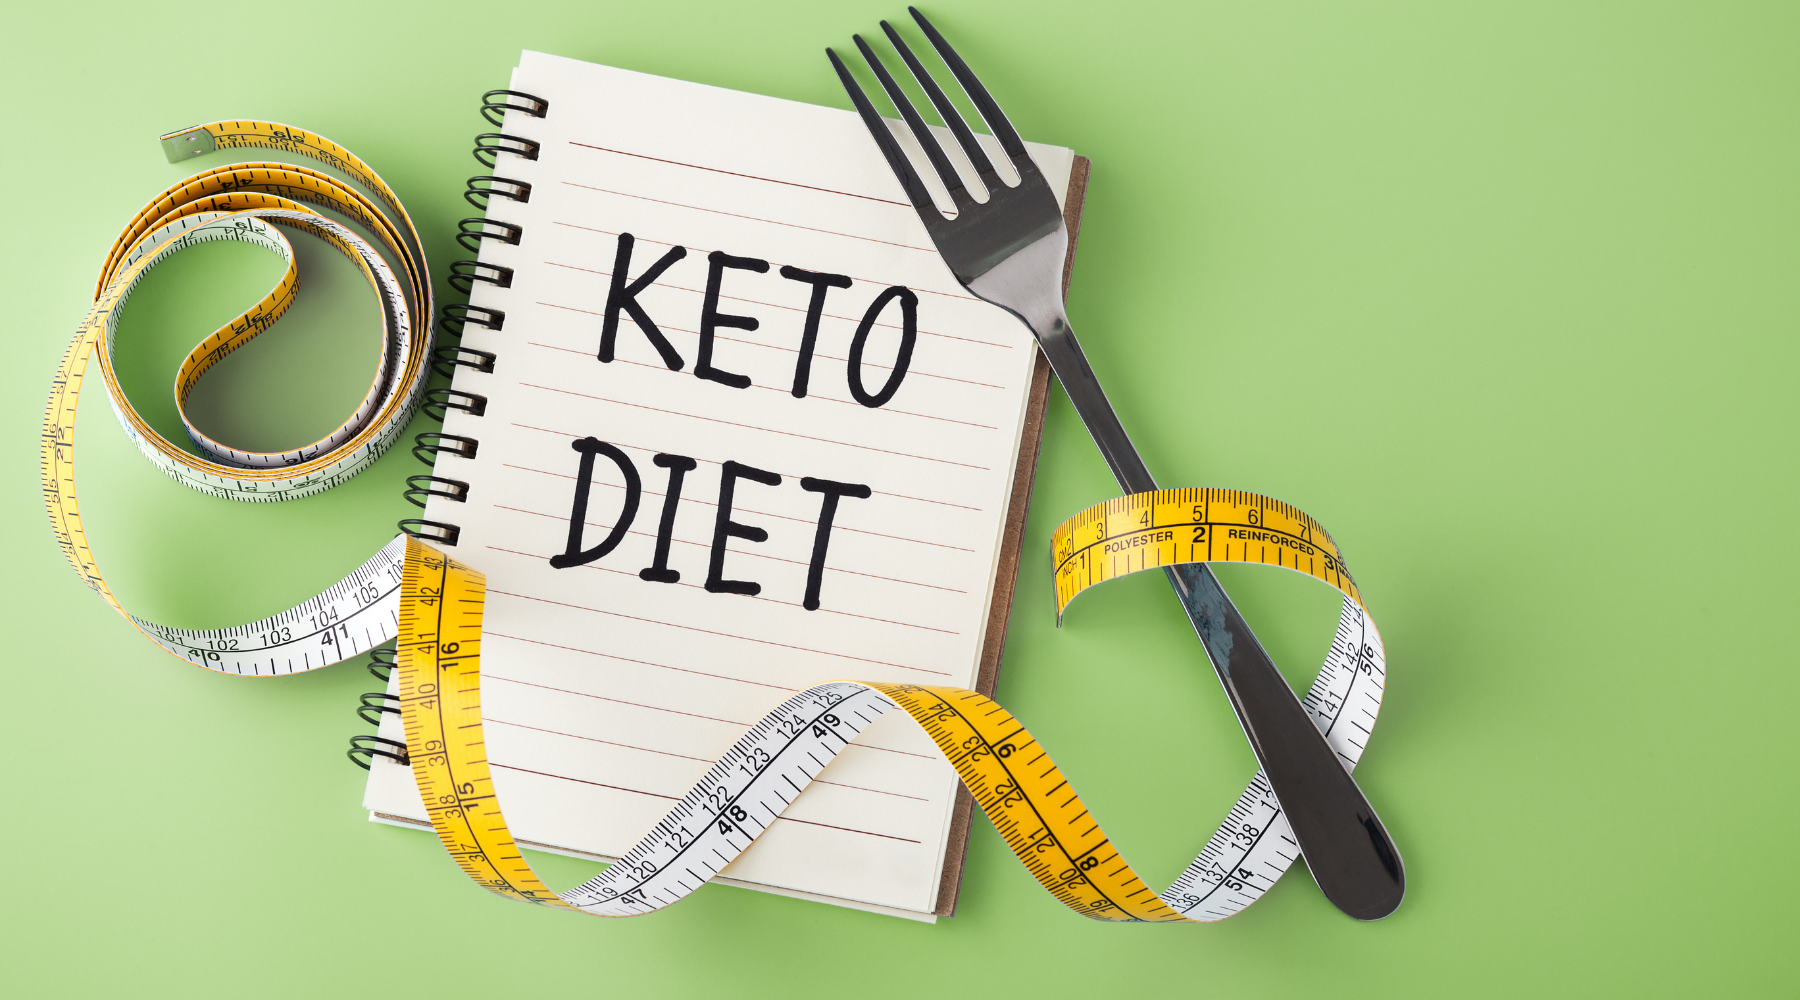 Alpino Peanut Butter and Keto: How it Fits into a Low-Carb Diet